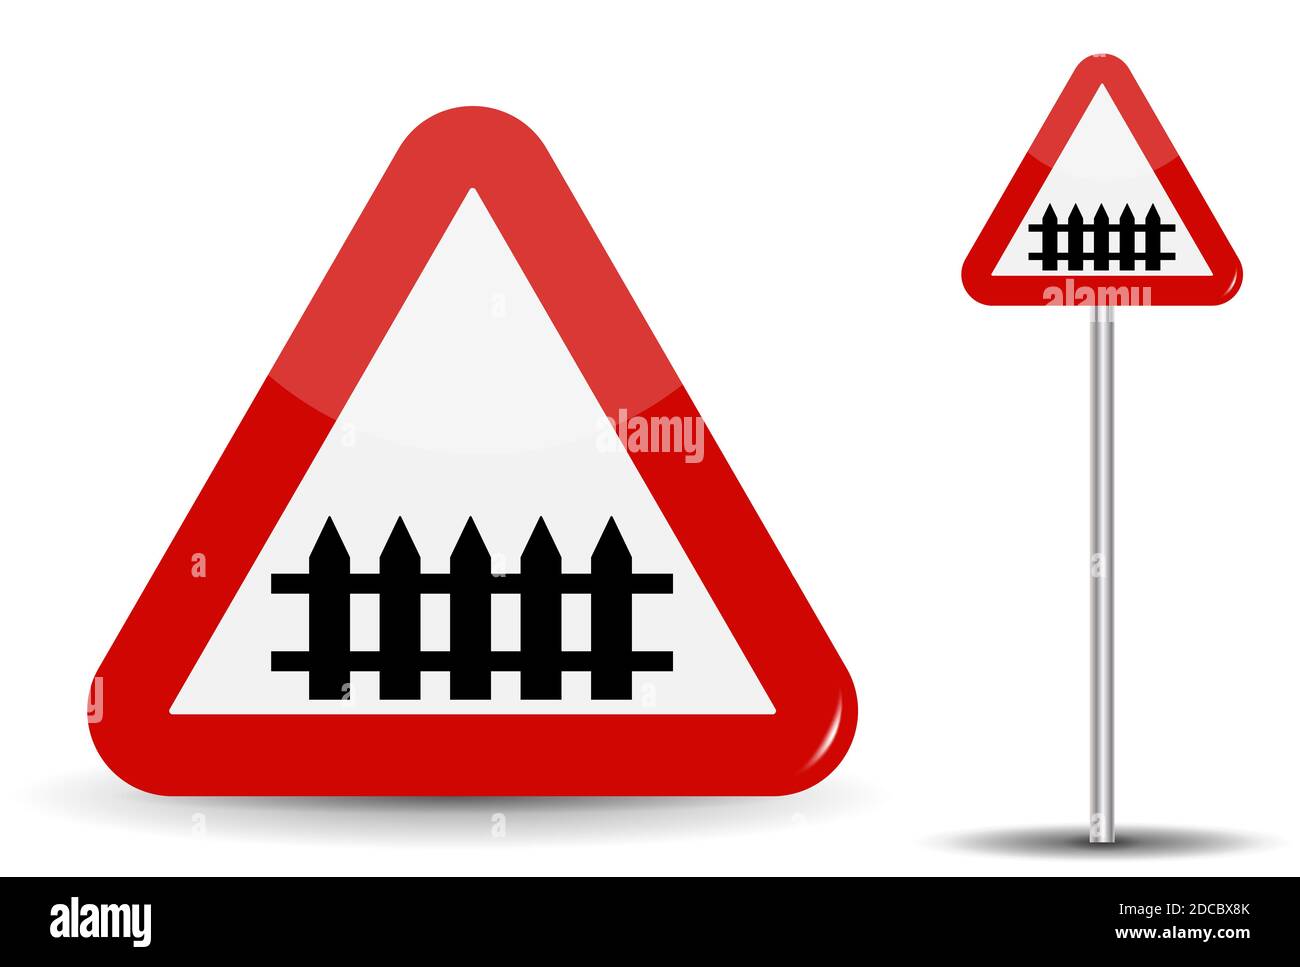 Road sign Warning railroad crossing. In Red Triangle, fence-barrier is schematically depicted. Illustration. Stock Photo